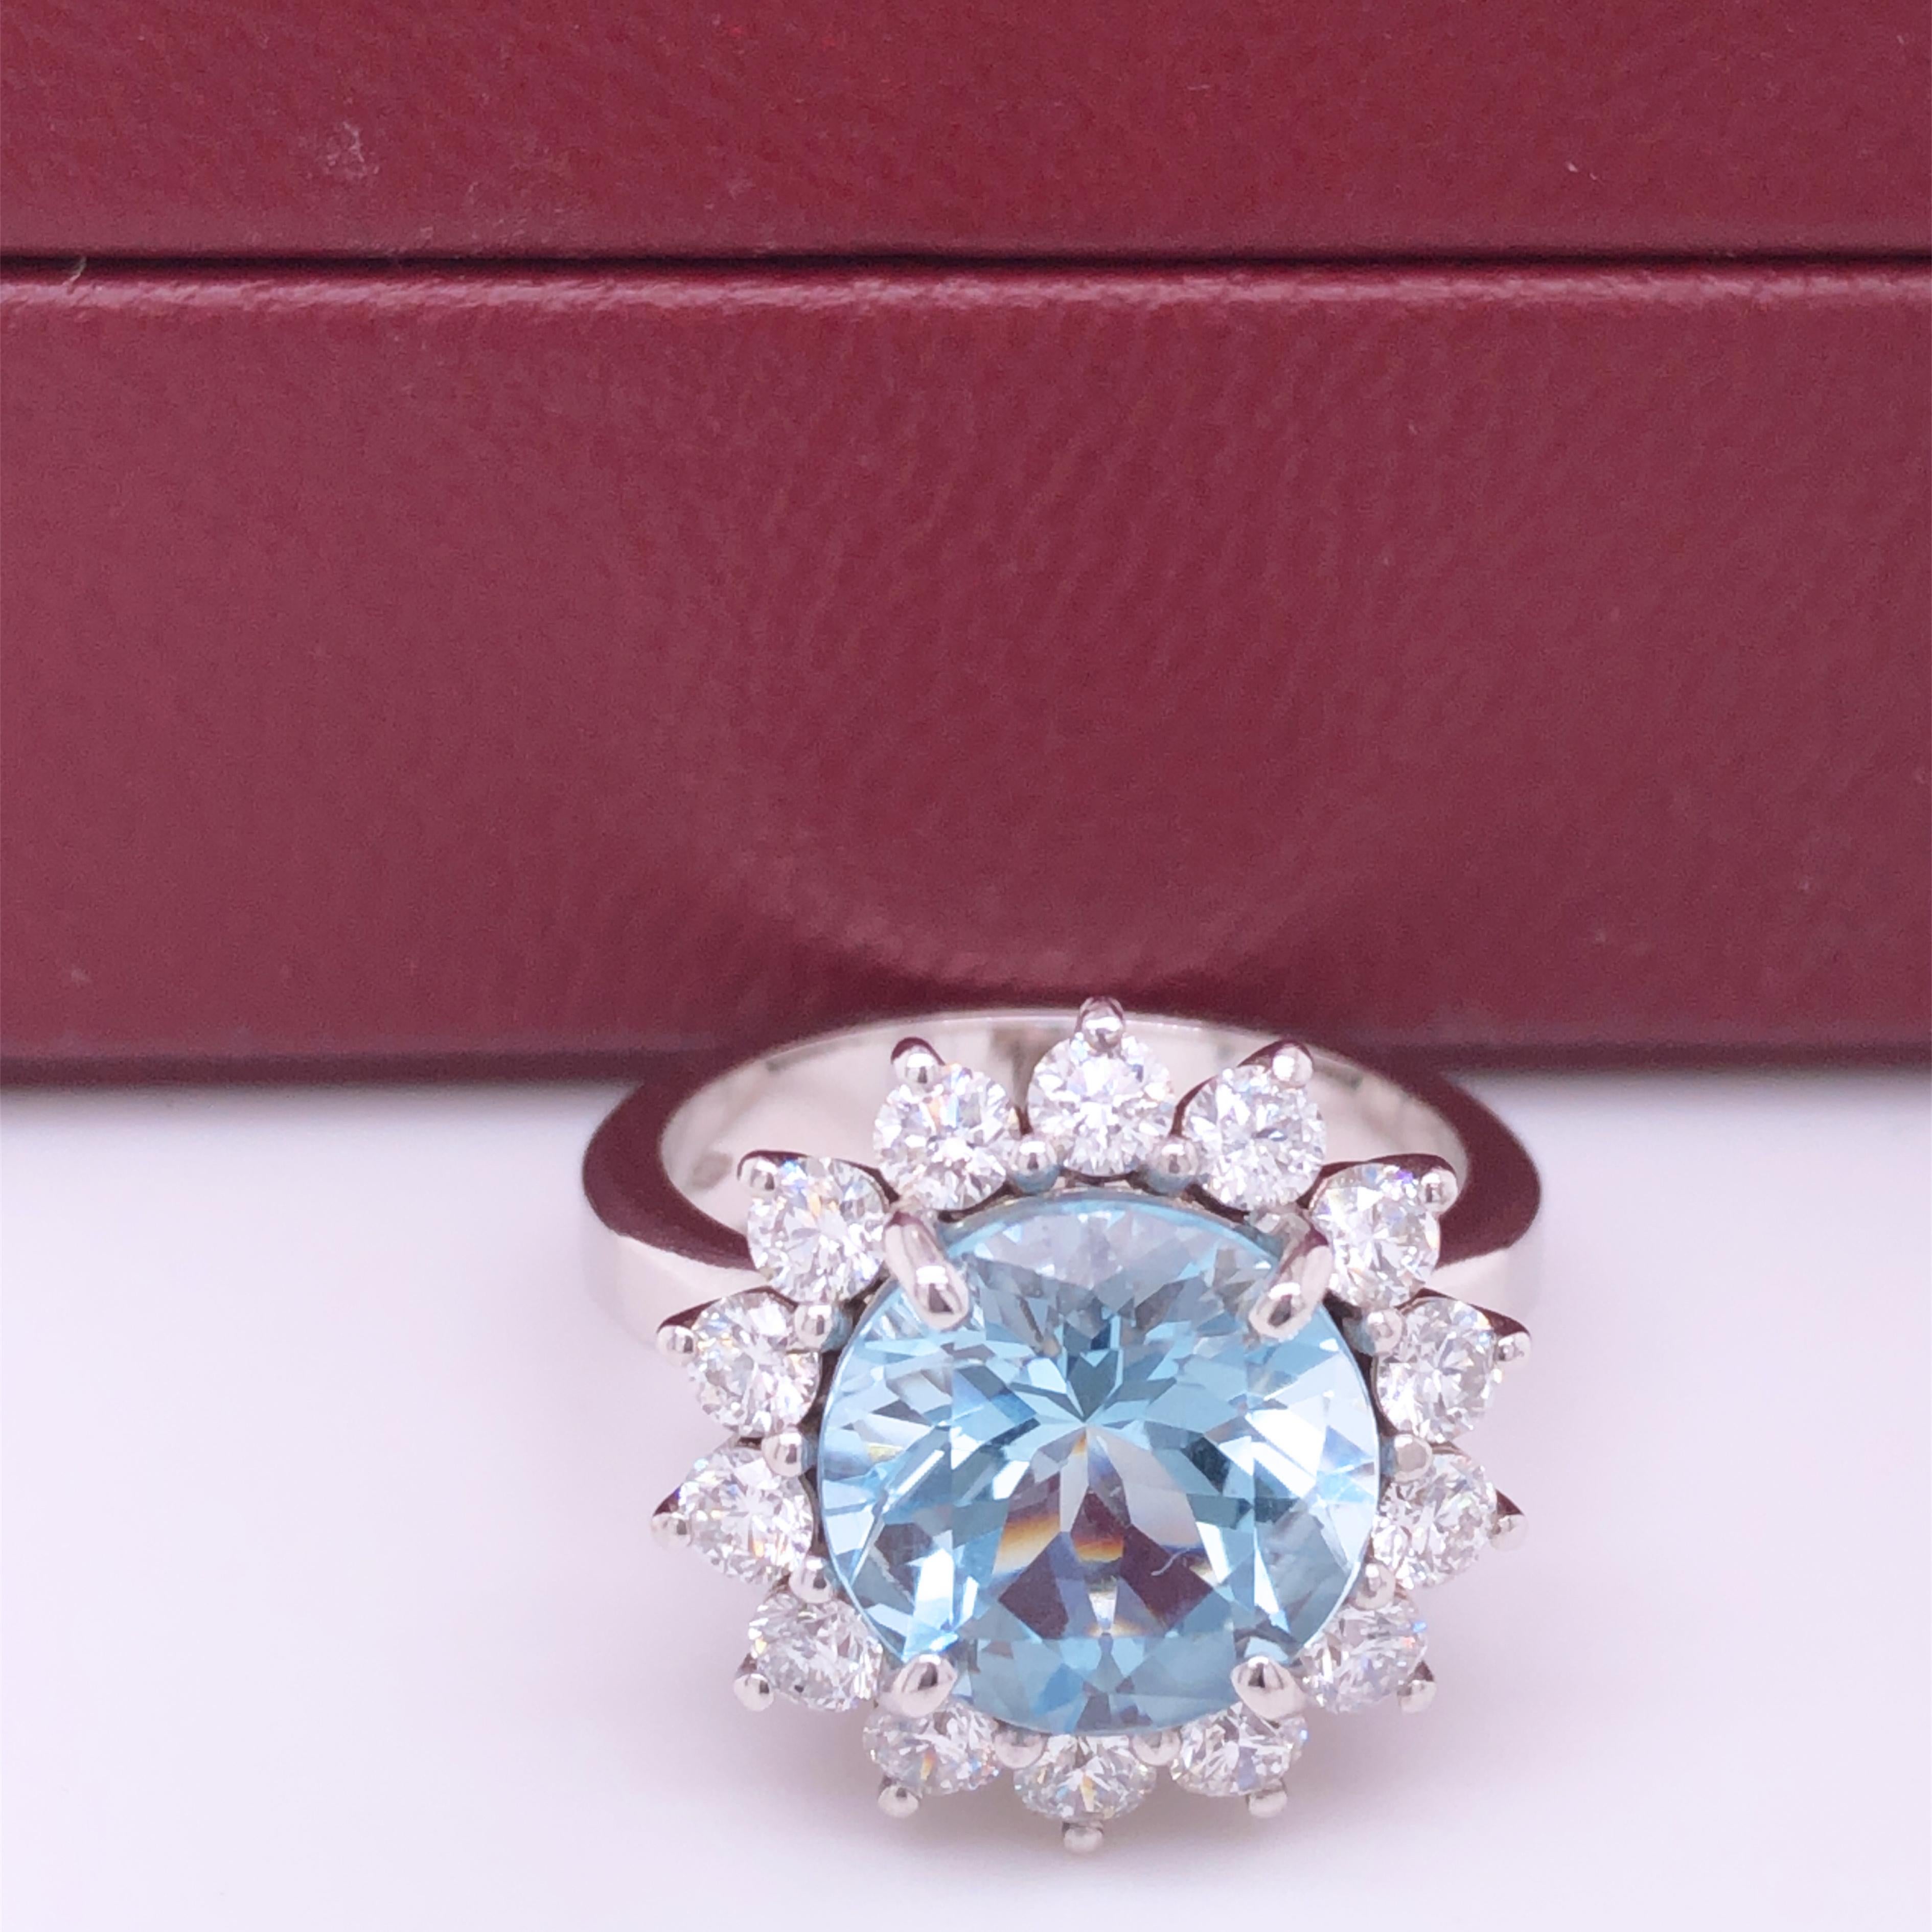 One-of-a-kind 3.25 Carat Brilliant Cut Natural Brazilian Aquamarine(diameter 0.393in, 10mm) in a Chic yet Timeless One Carat White Diamond(F-G, Vvs1) 18Kt White Gold Halo Setting.
We are proud to offer this awesome piece perfect as Engagement Ring